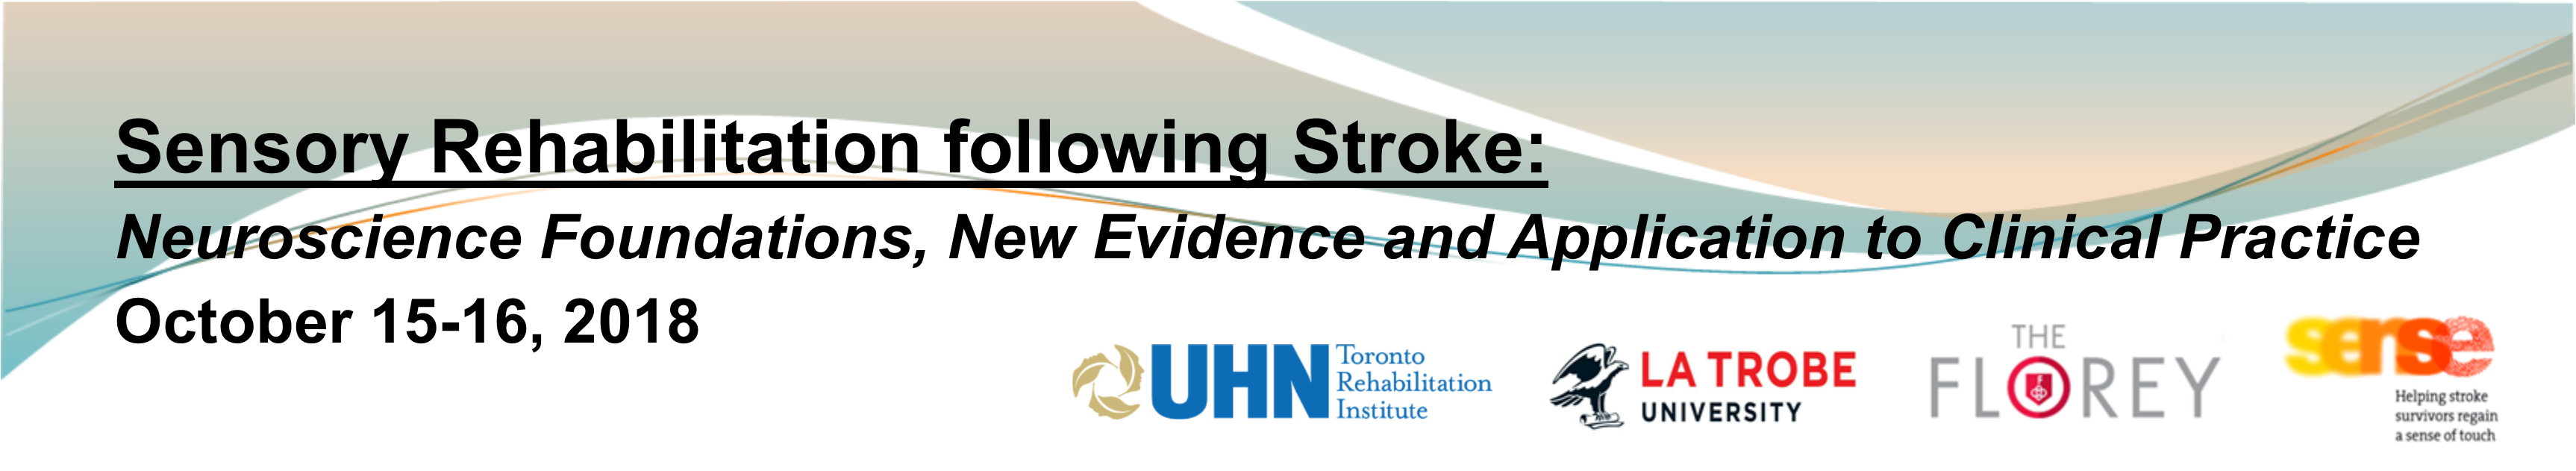 Sensory Rehabilitation following Stroke: Neuroscience Foundations, New Evidence and Application to Clinical Practice